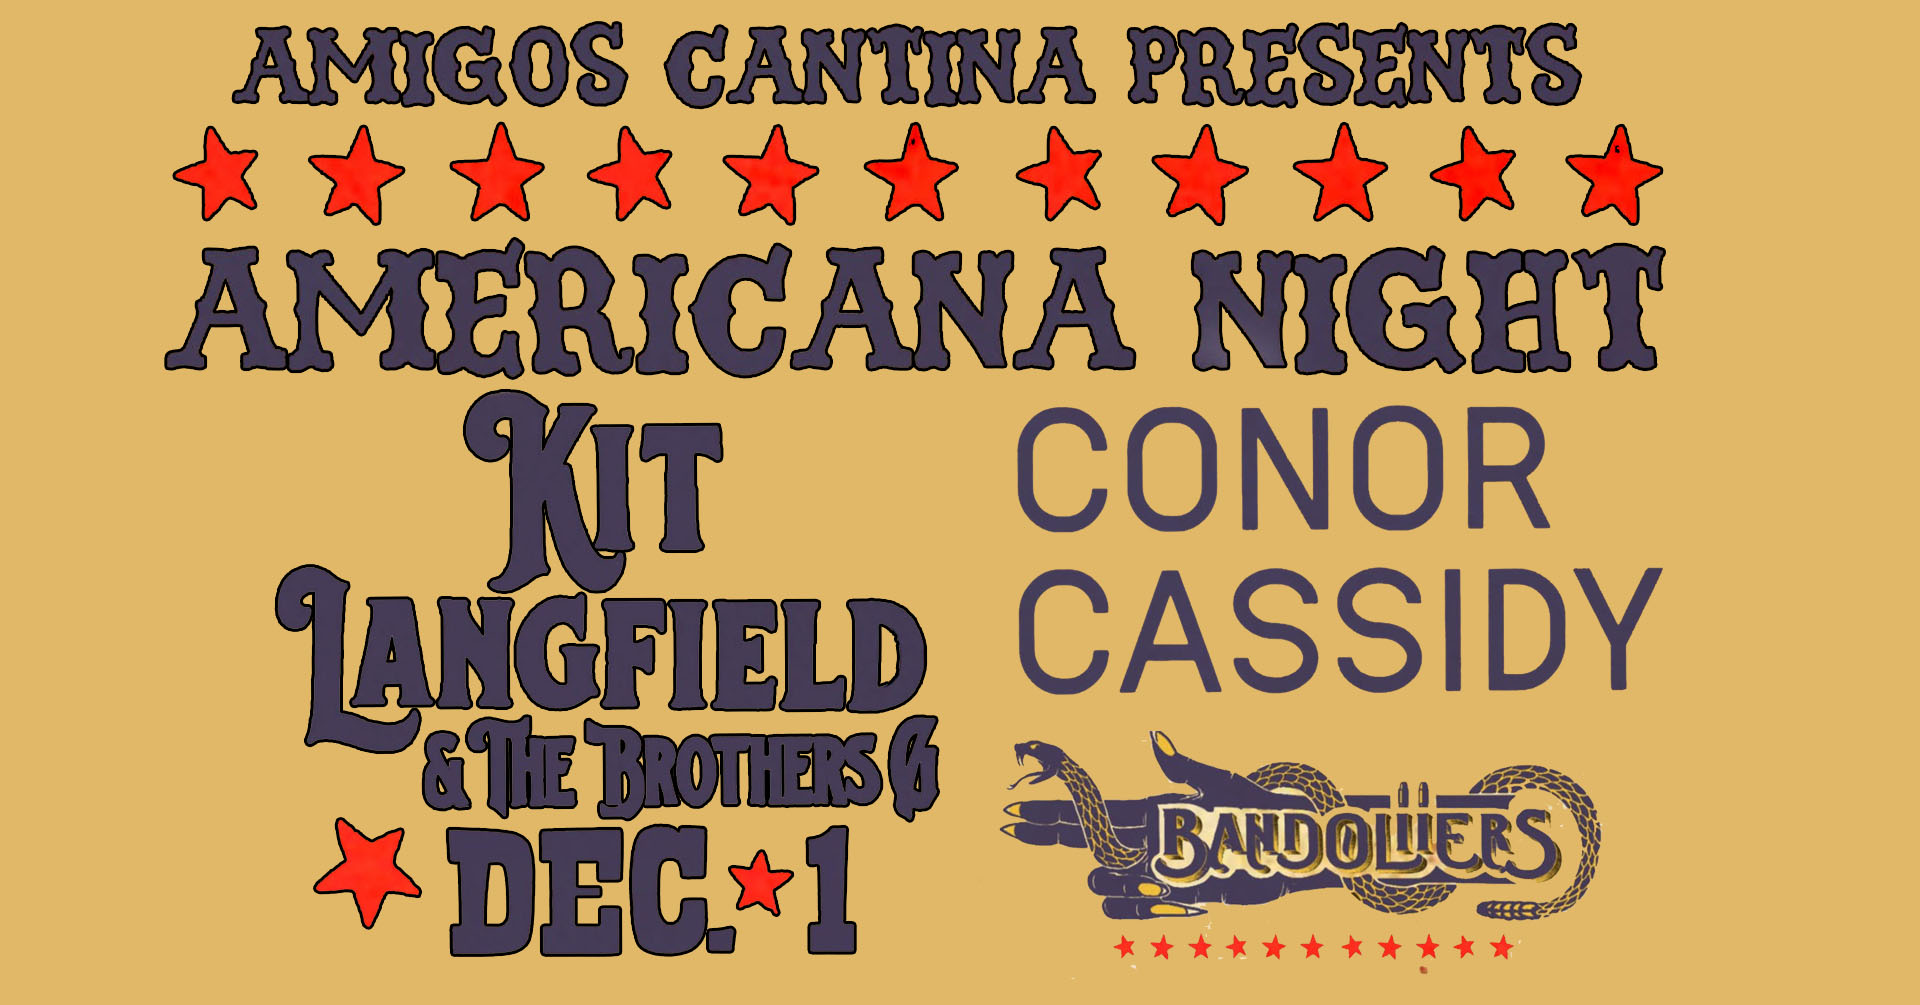 Americana Night Featuring: Kit Langfield and the Brothers G, Conor Cassidy, Bandoliiers